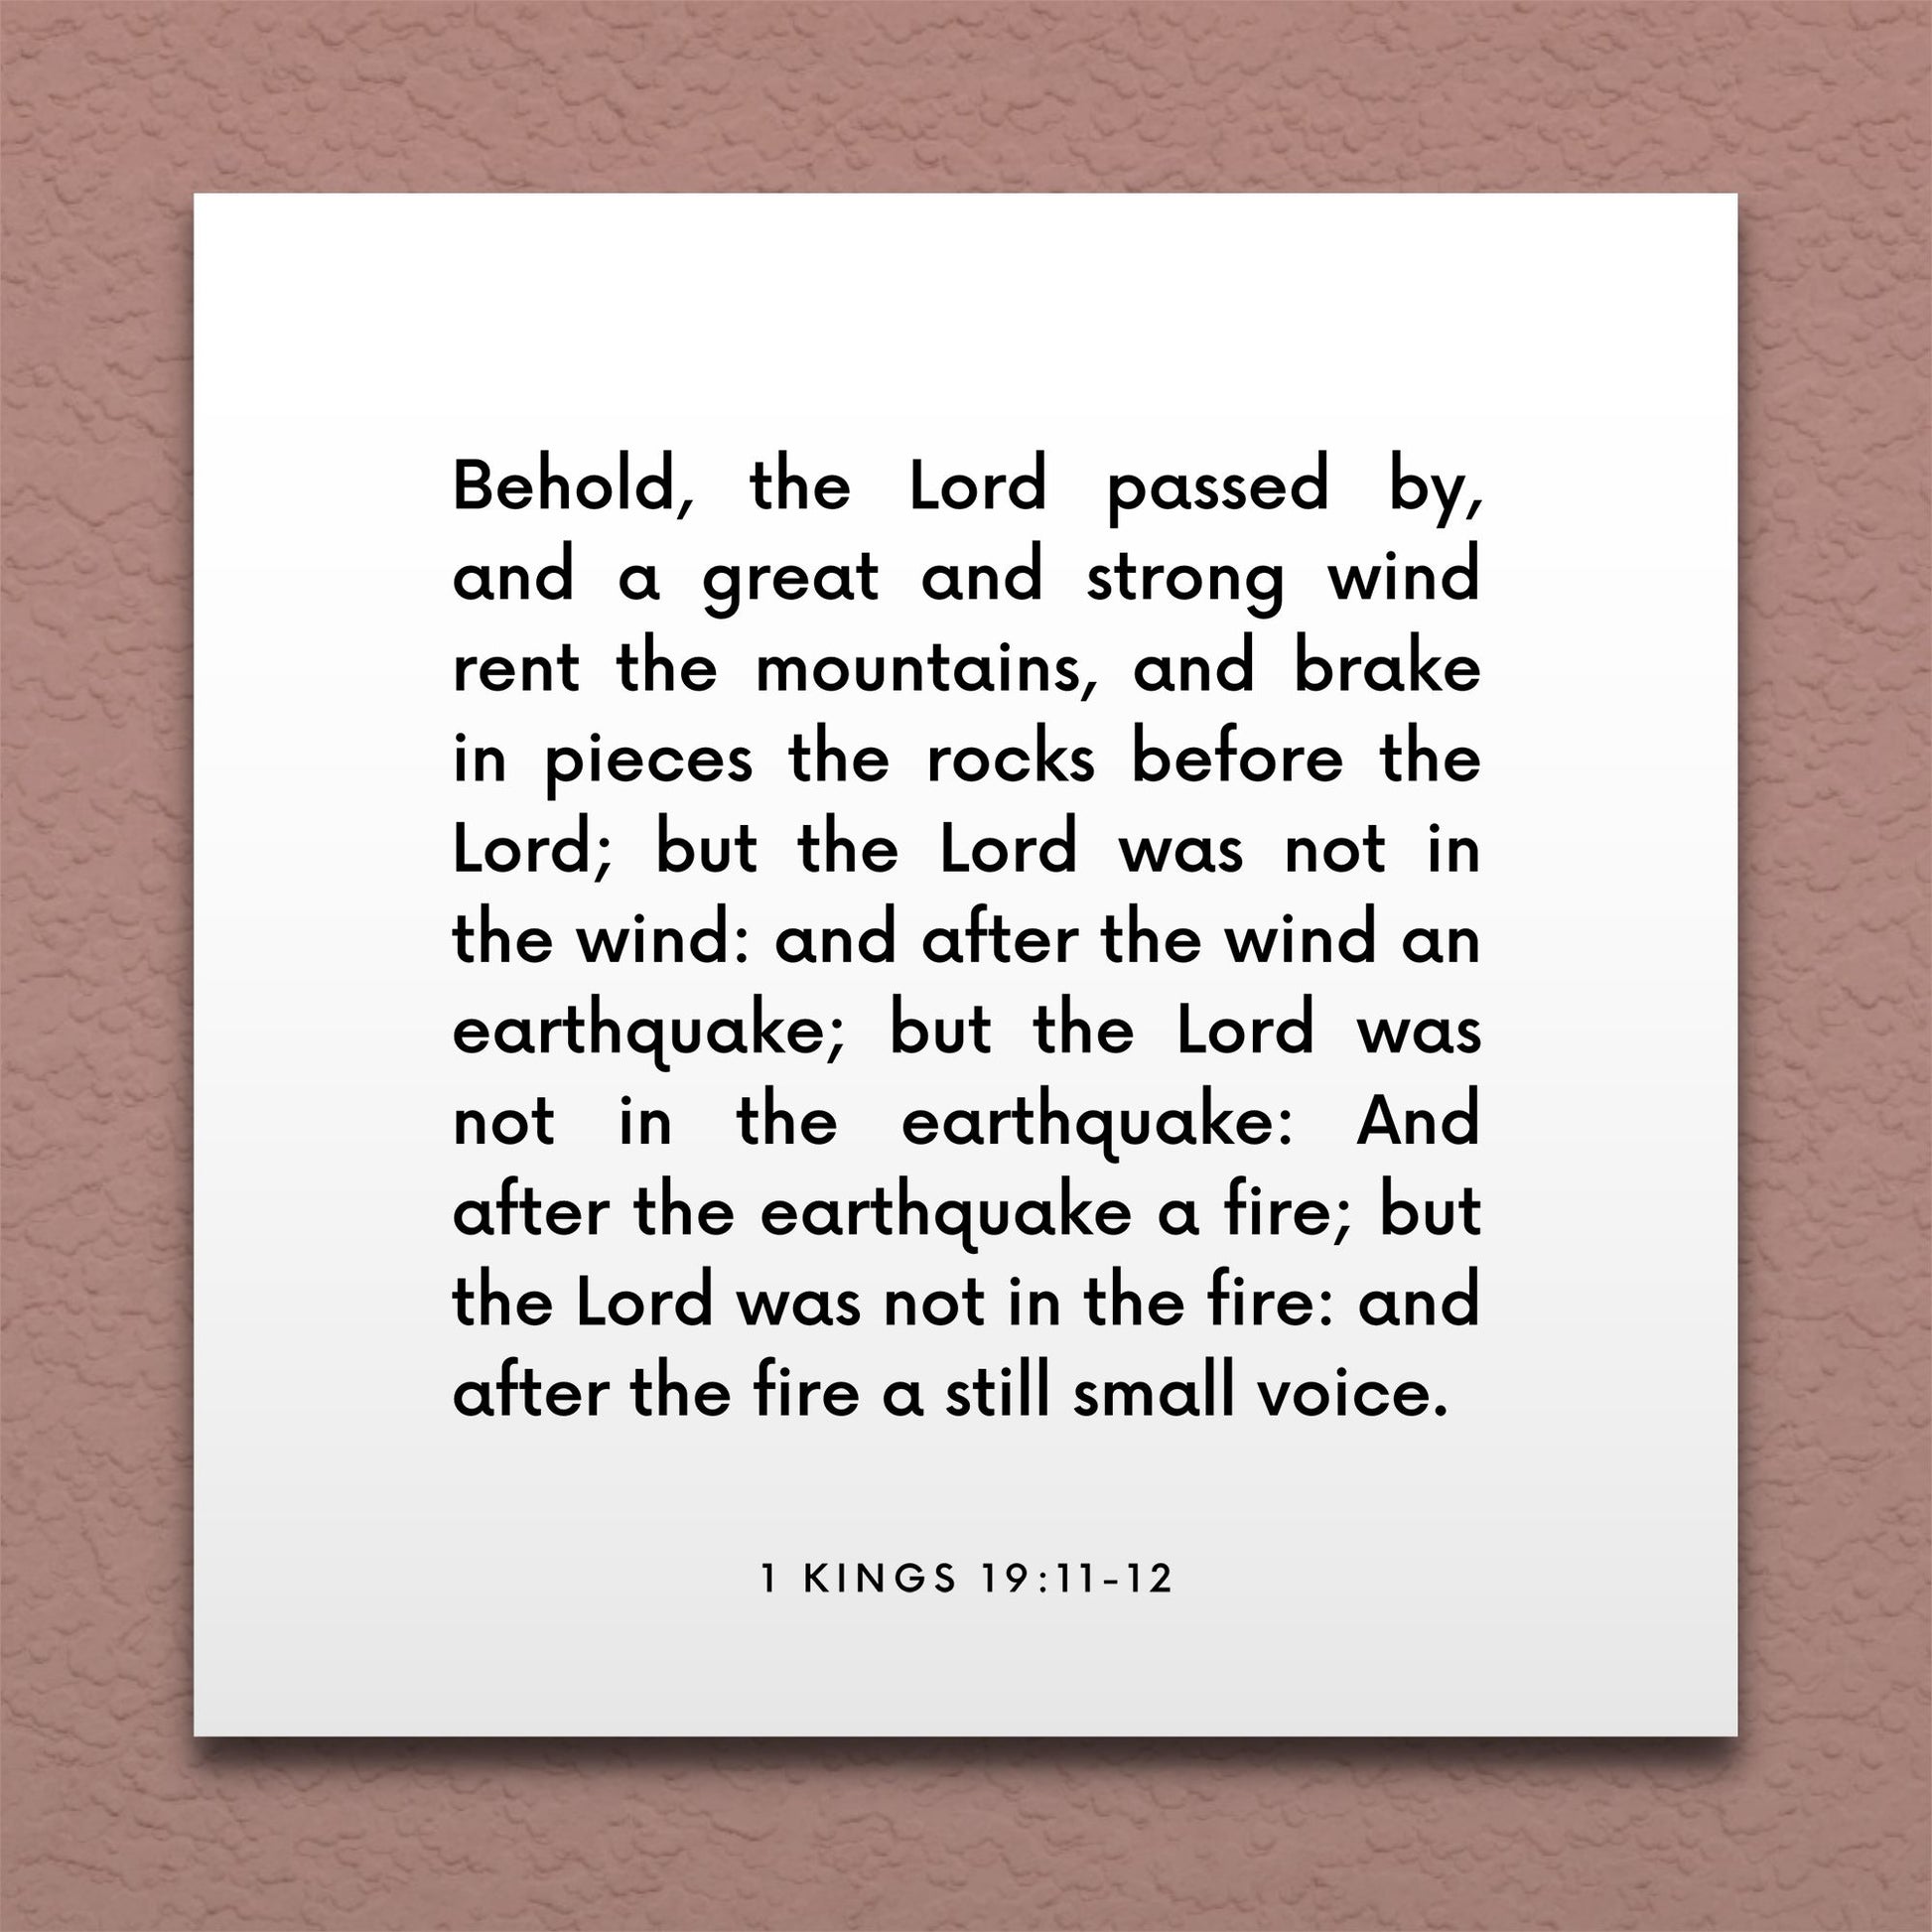 Wall-mounted scripture tile for 1 Kings 19:11-12 - "After the fire, a still small voice"